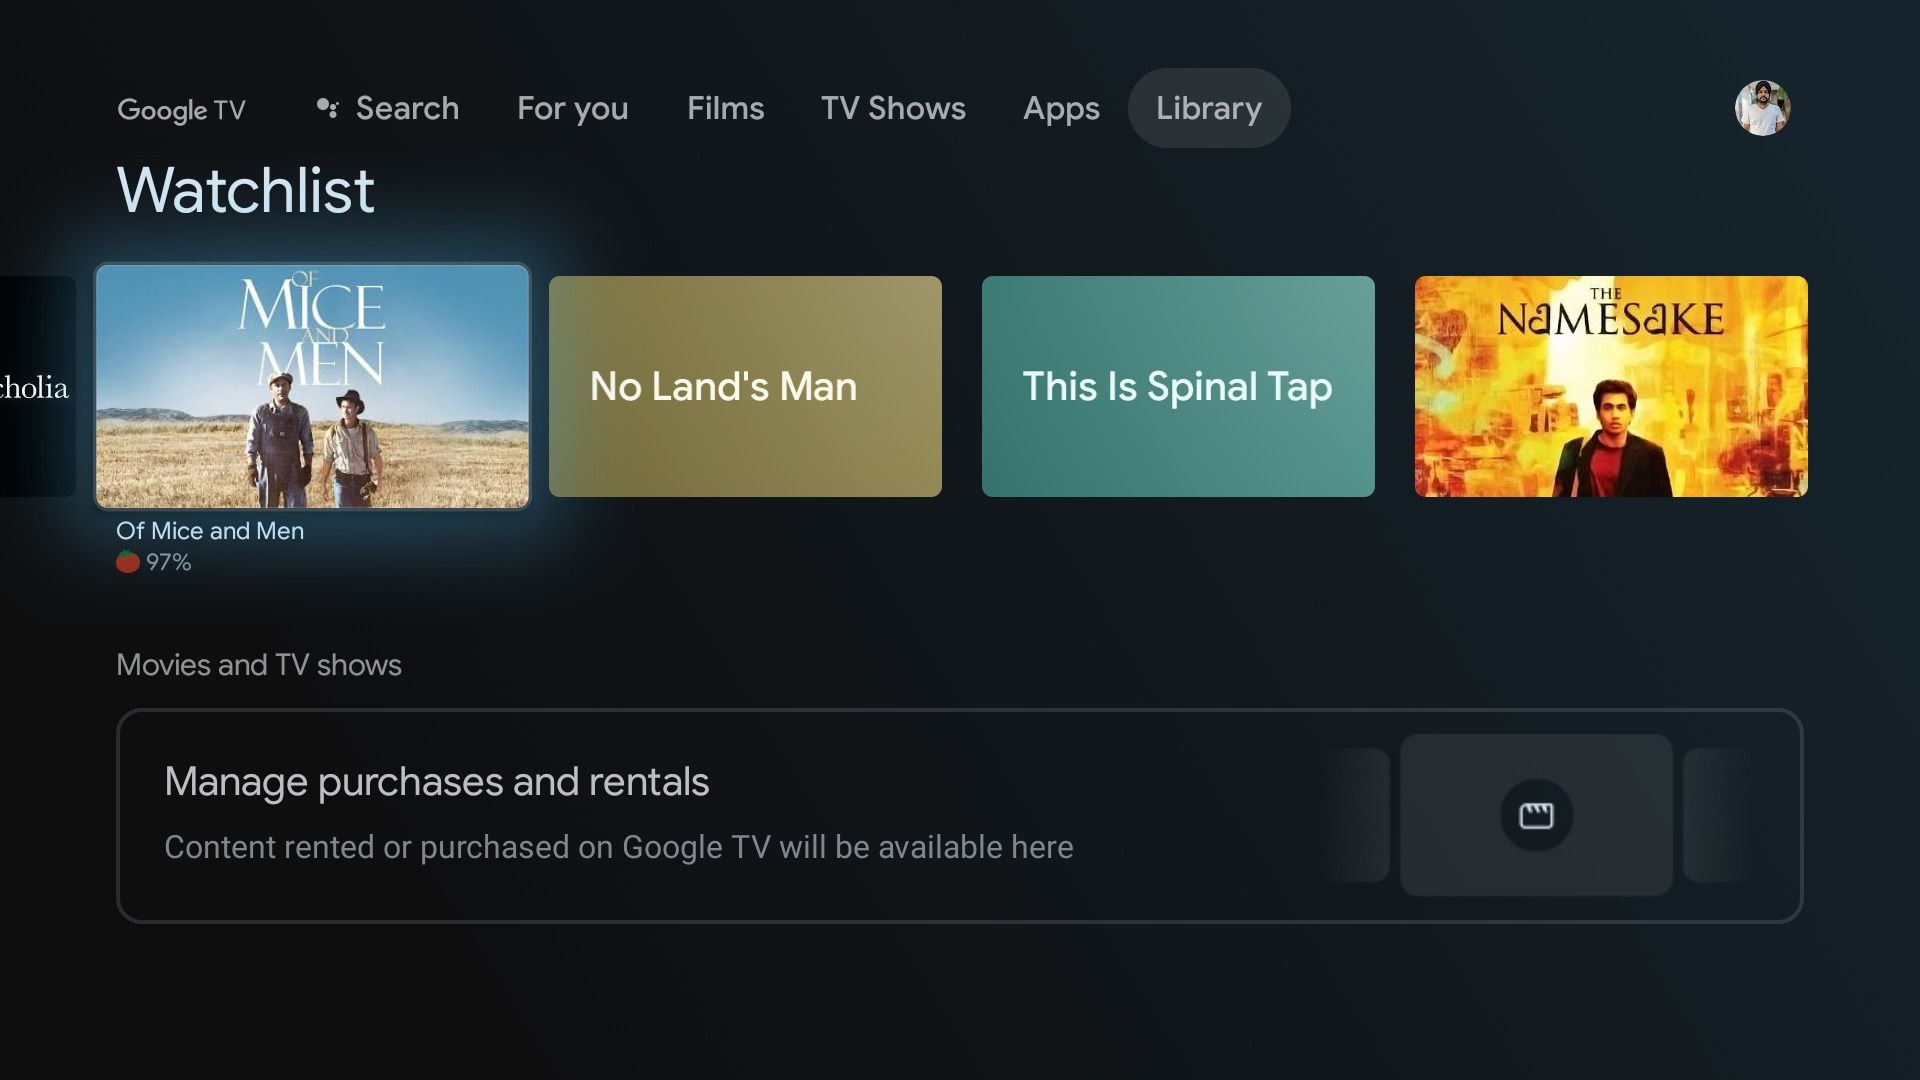 How to set up Android TV and Google TV: A complete guide